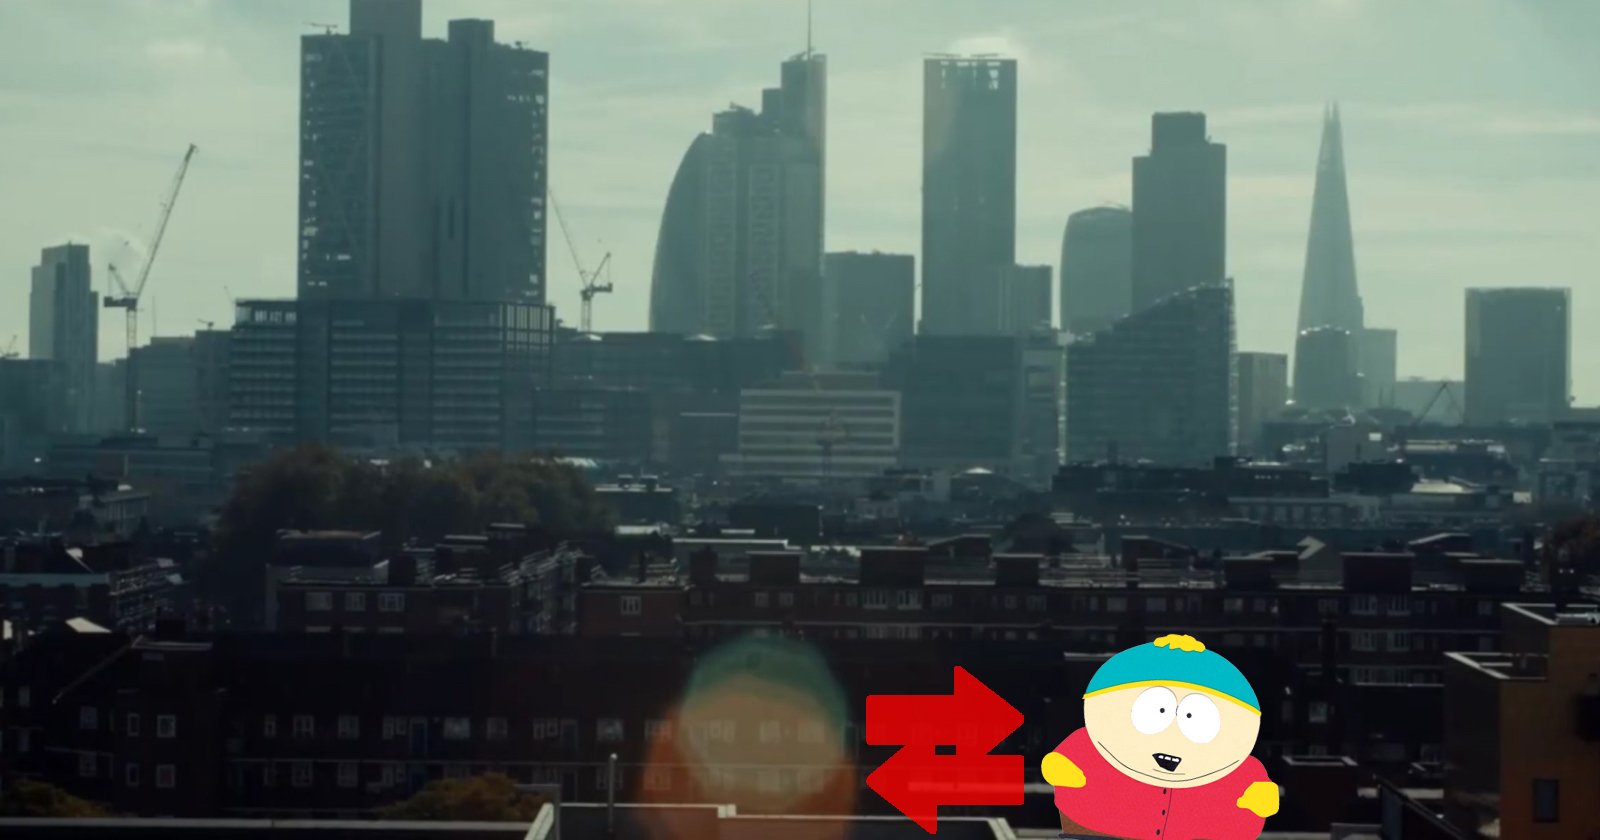 Eric Cartman Lens Flare Photo Becomes an All-Time Top Reddit Post